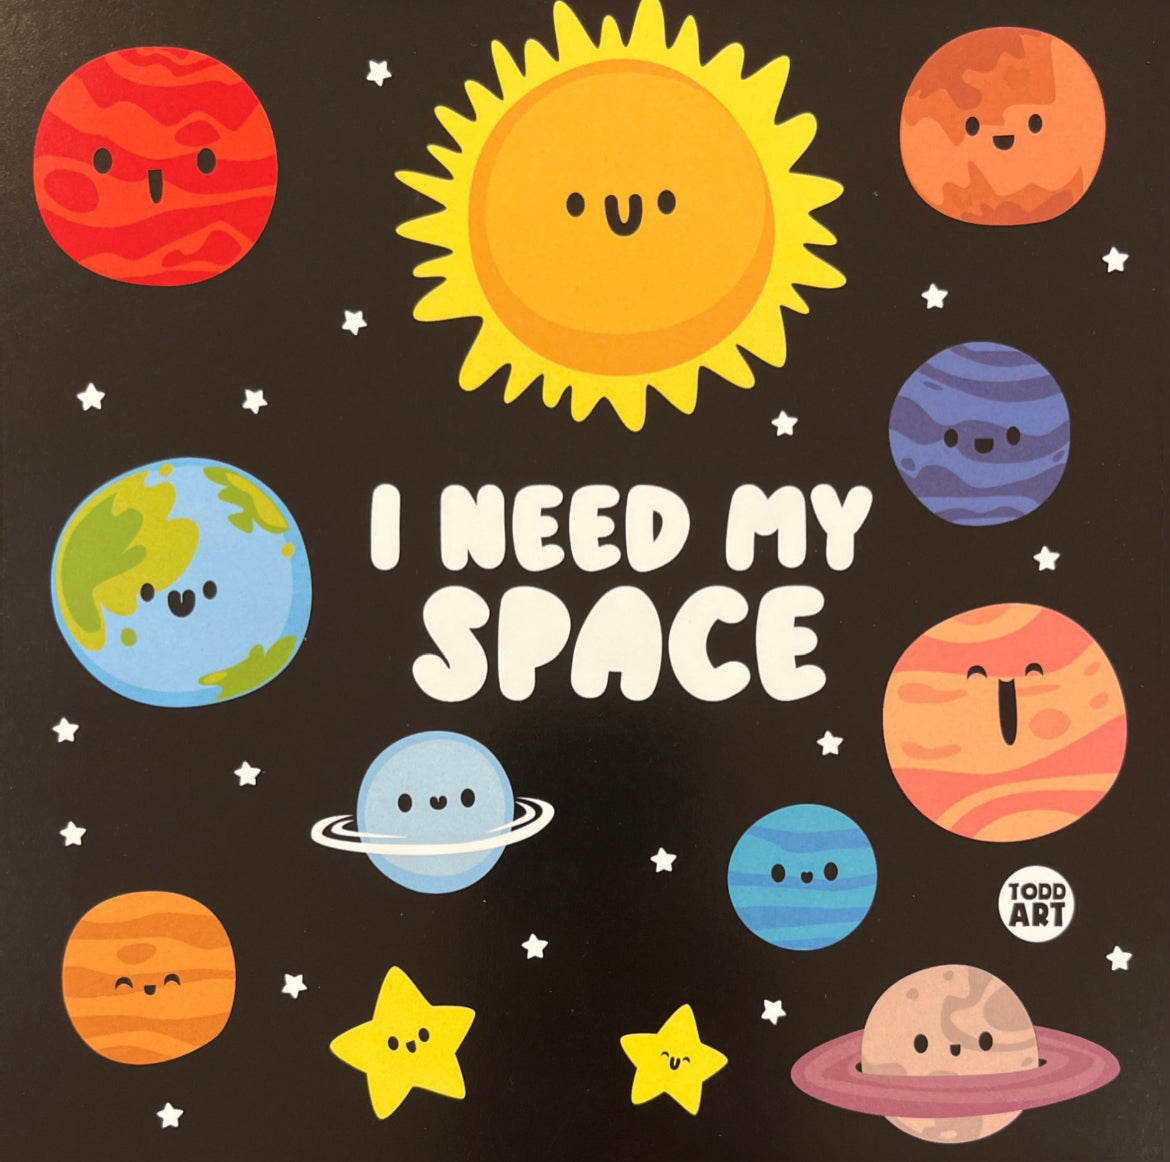 I need my Space